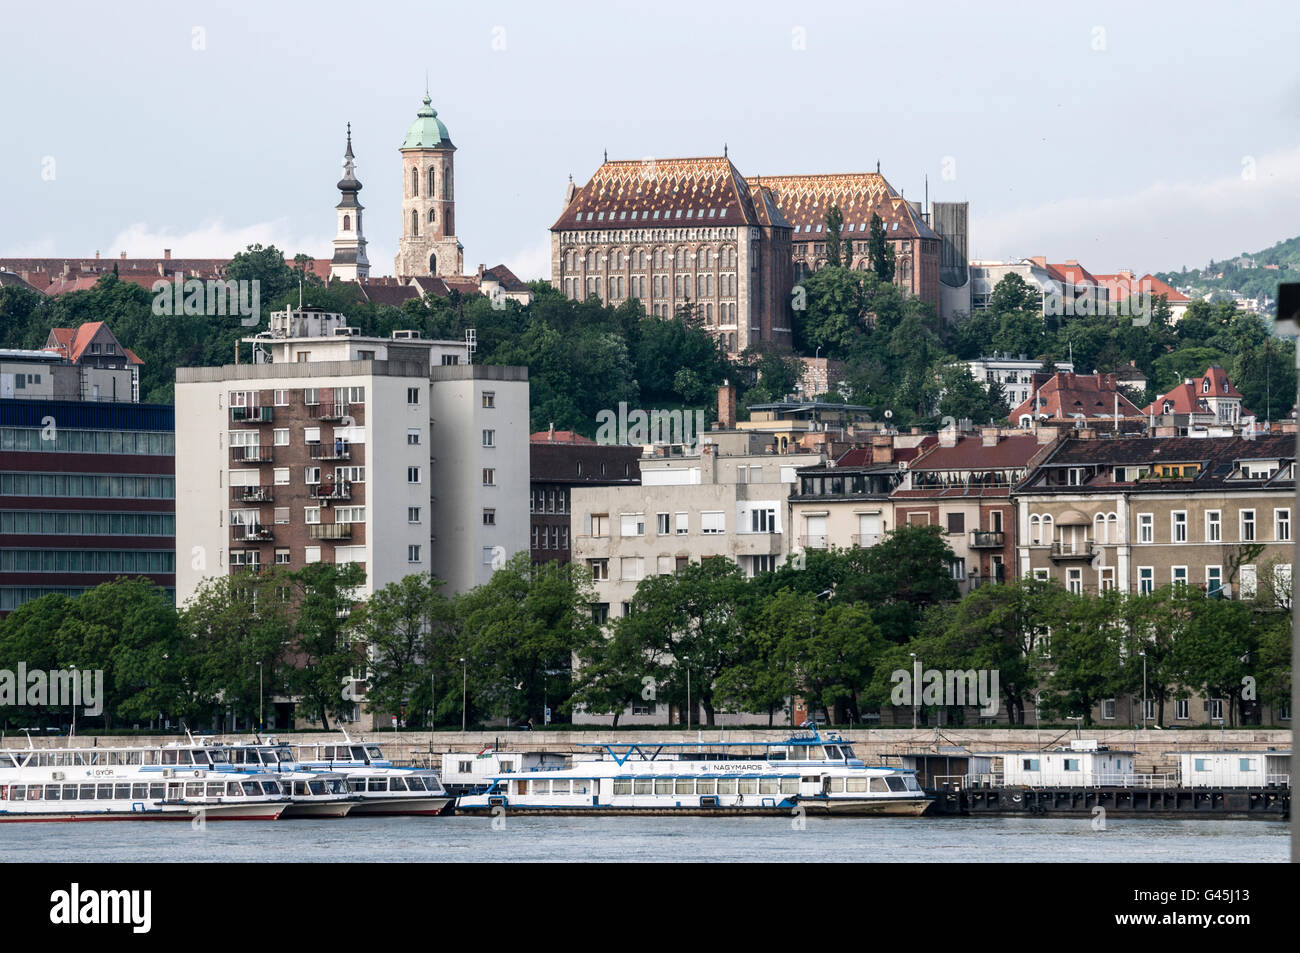 Skyline of a tiled roof of the Hungarian National Archives and the Mary Magdalene Tower with a green dome on Buda Castle Hill, i Stock Photo